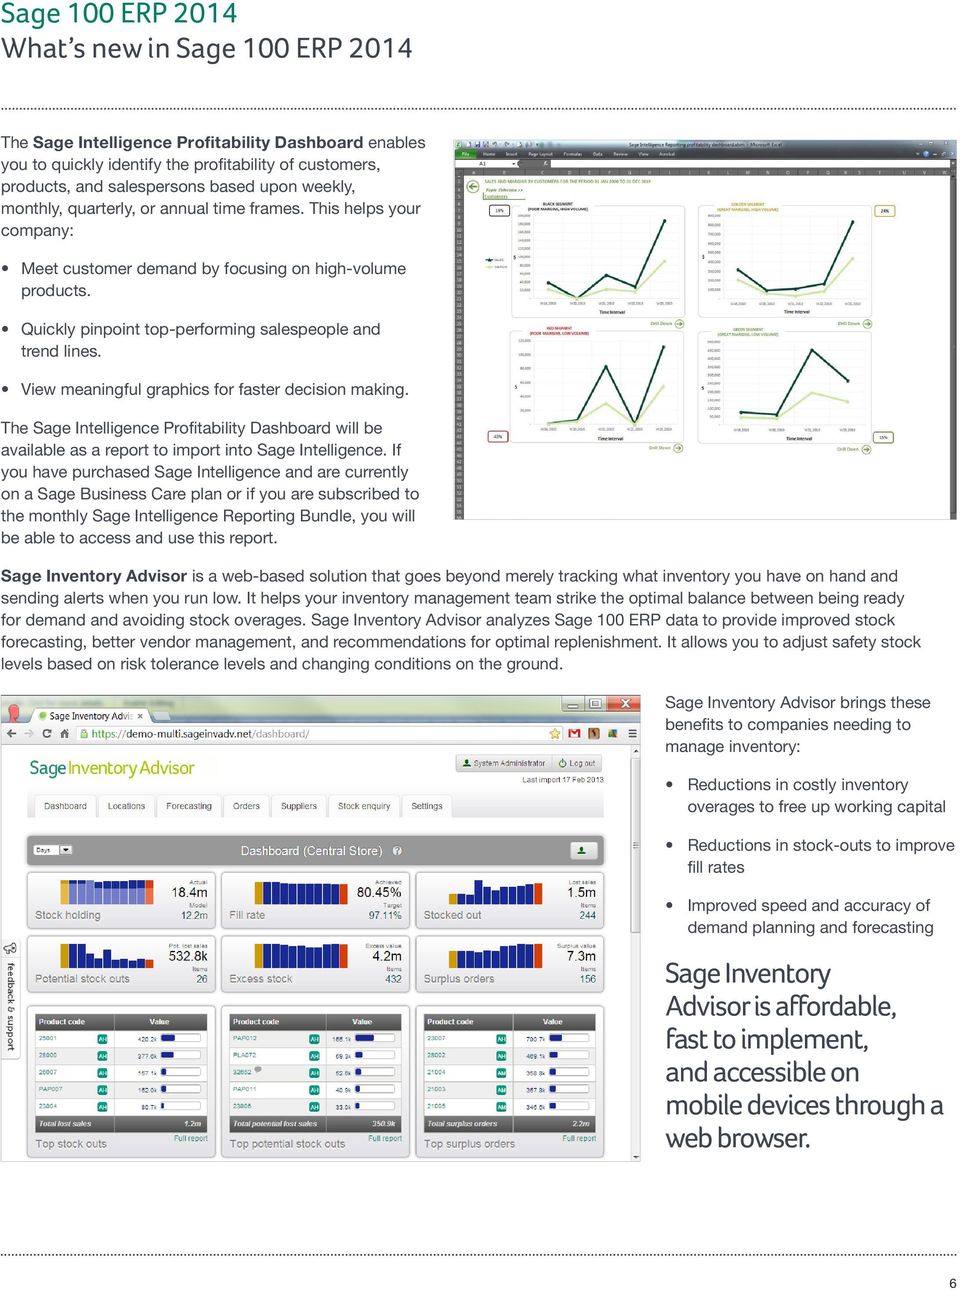 The Sage Intelligence Profitability Dashboard will be available as a report to import into Sage Intelligence.